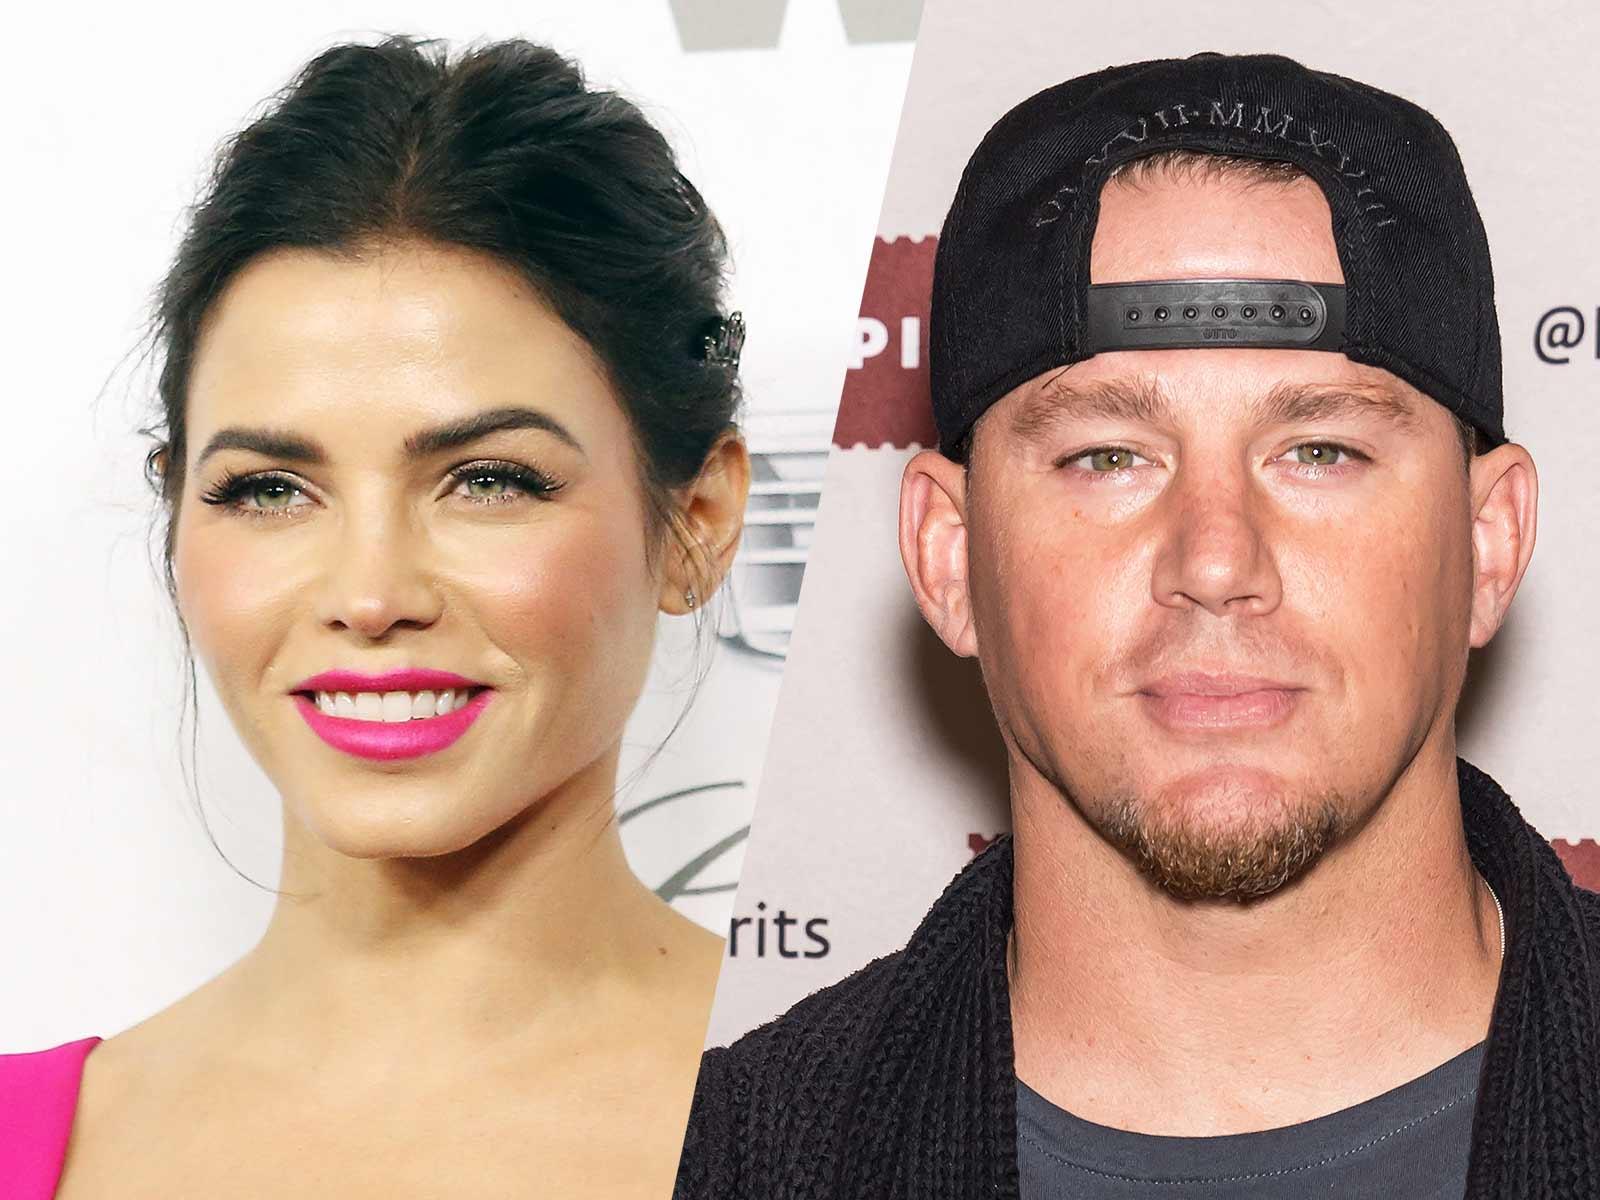 Channing Tatum Raises Concern Among Friends After Taking Daughter to Jessie J Concert